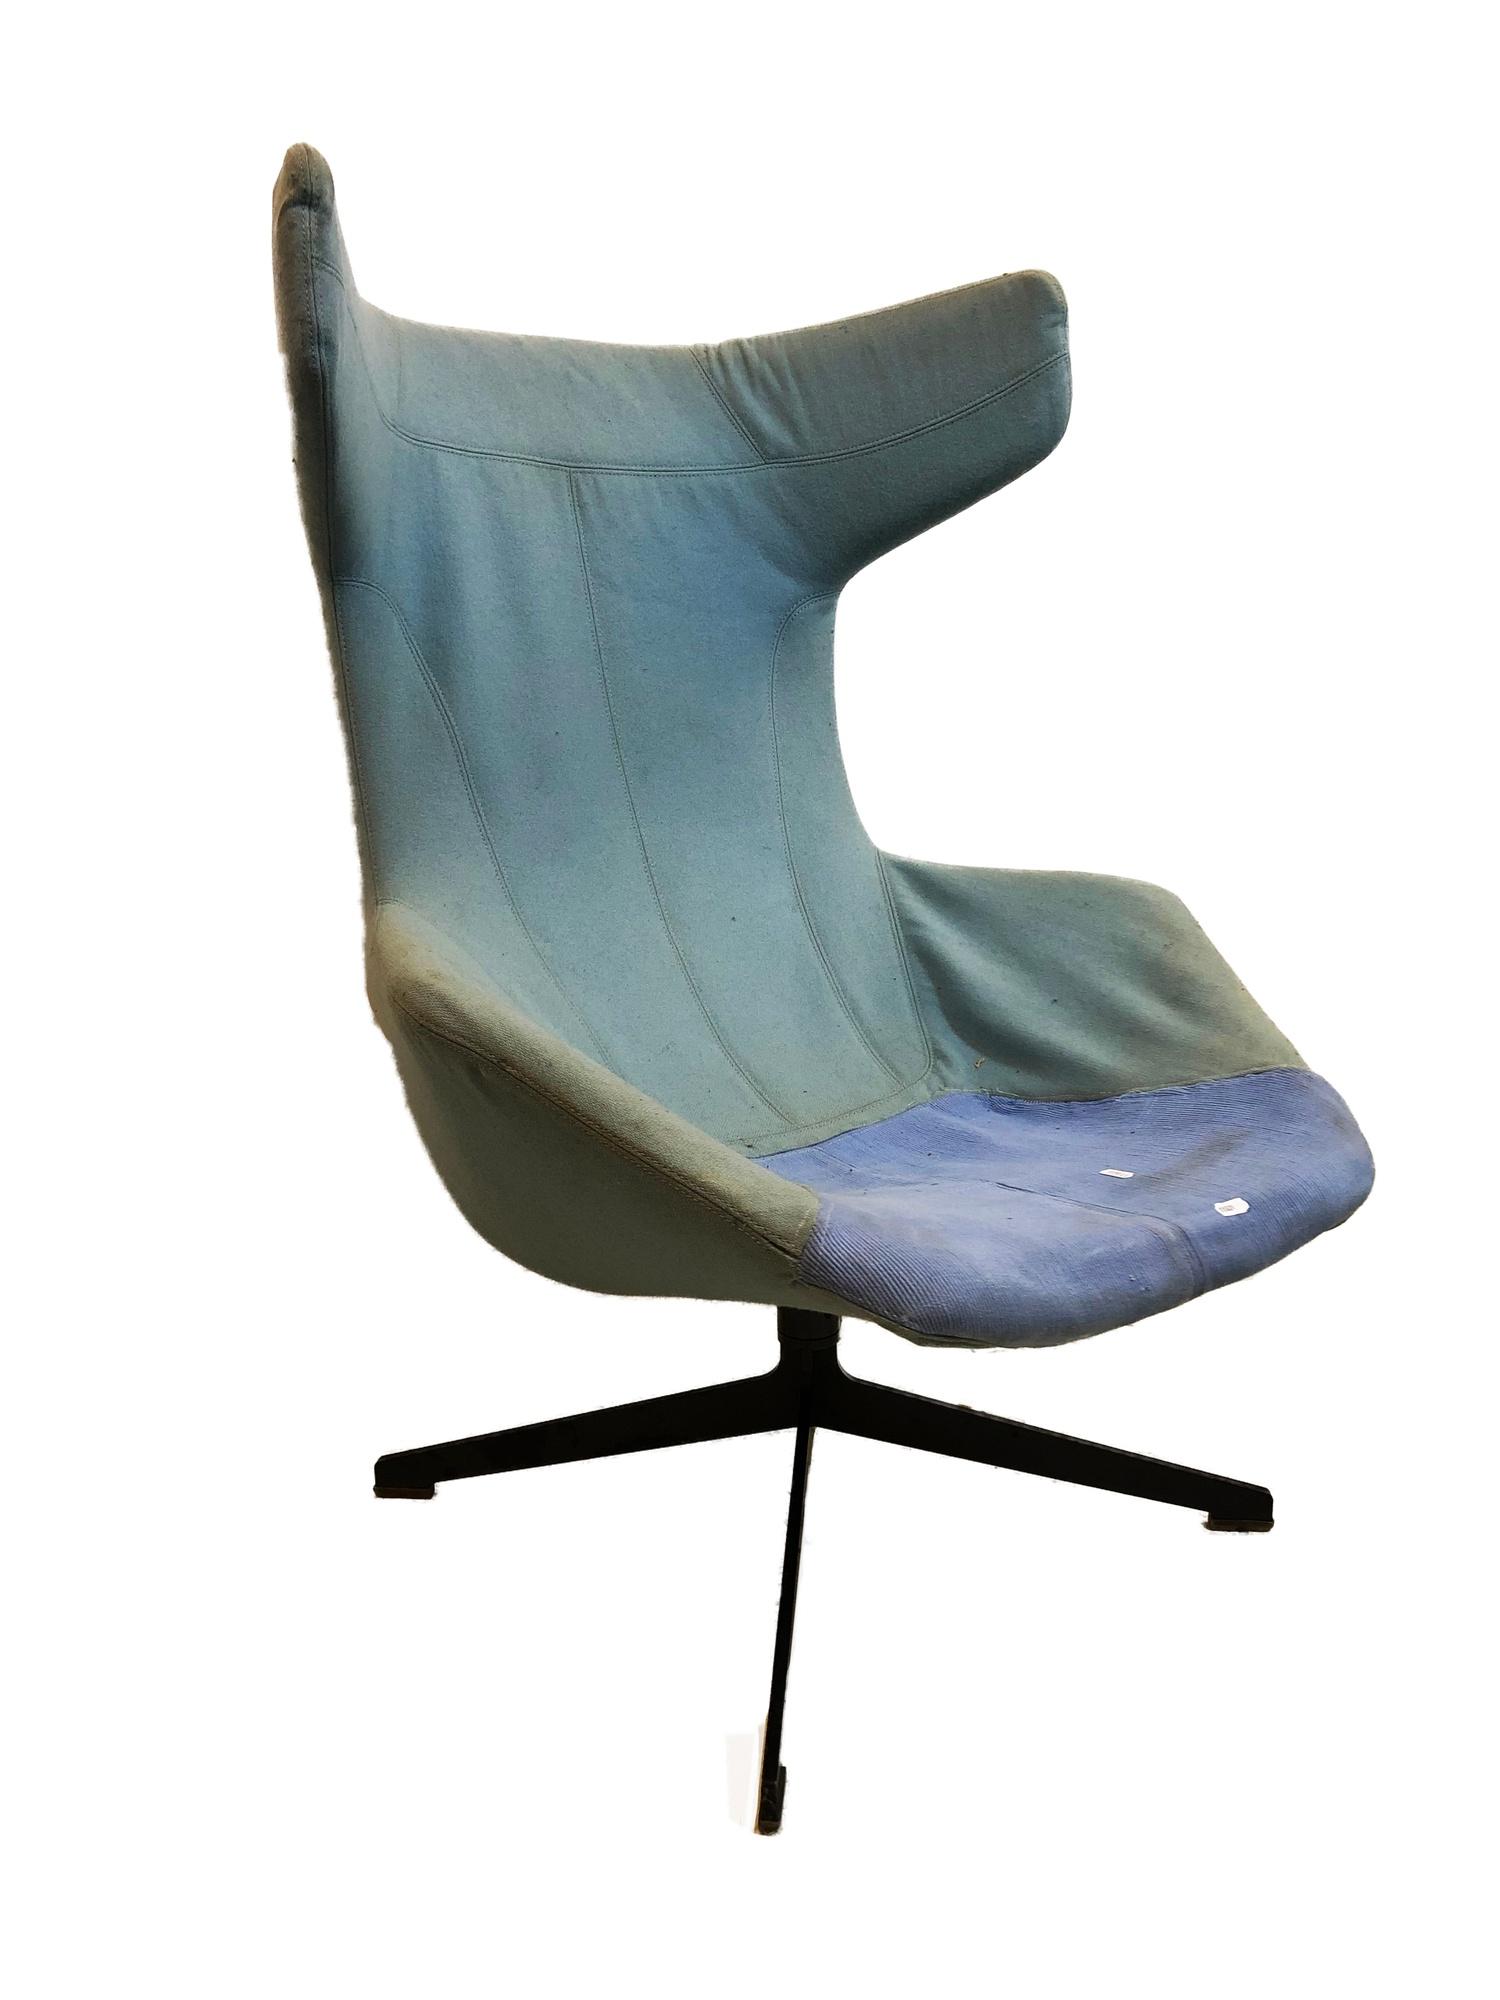 Alfredo Haberli 'Take A Line For A Walk' Chair on 4 spoke swivel base, fabric upholstery (possibly - Image 3 of 3